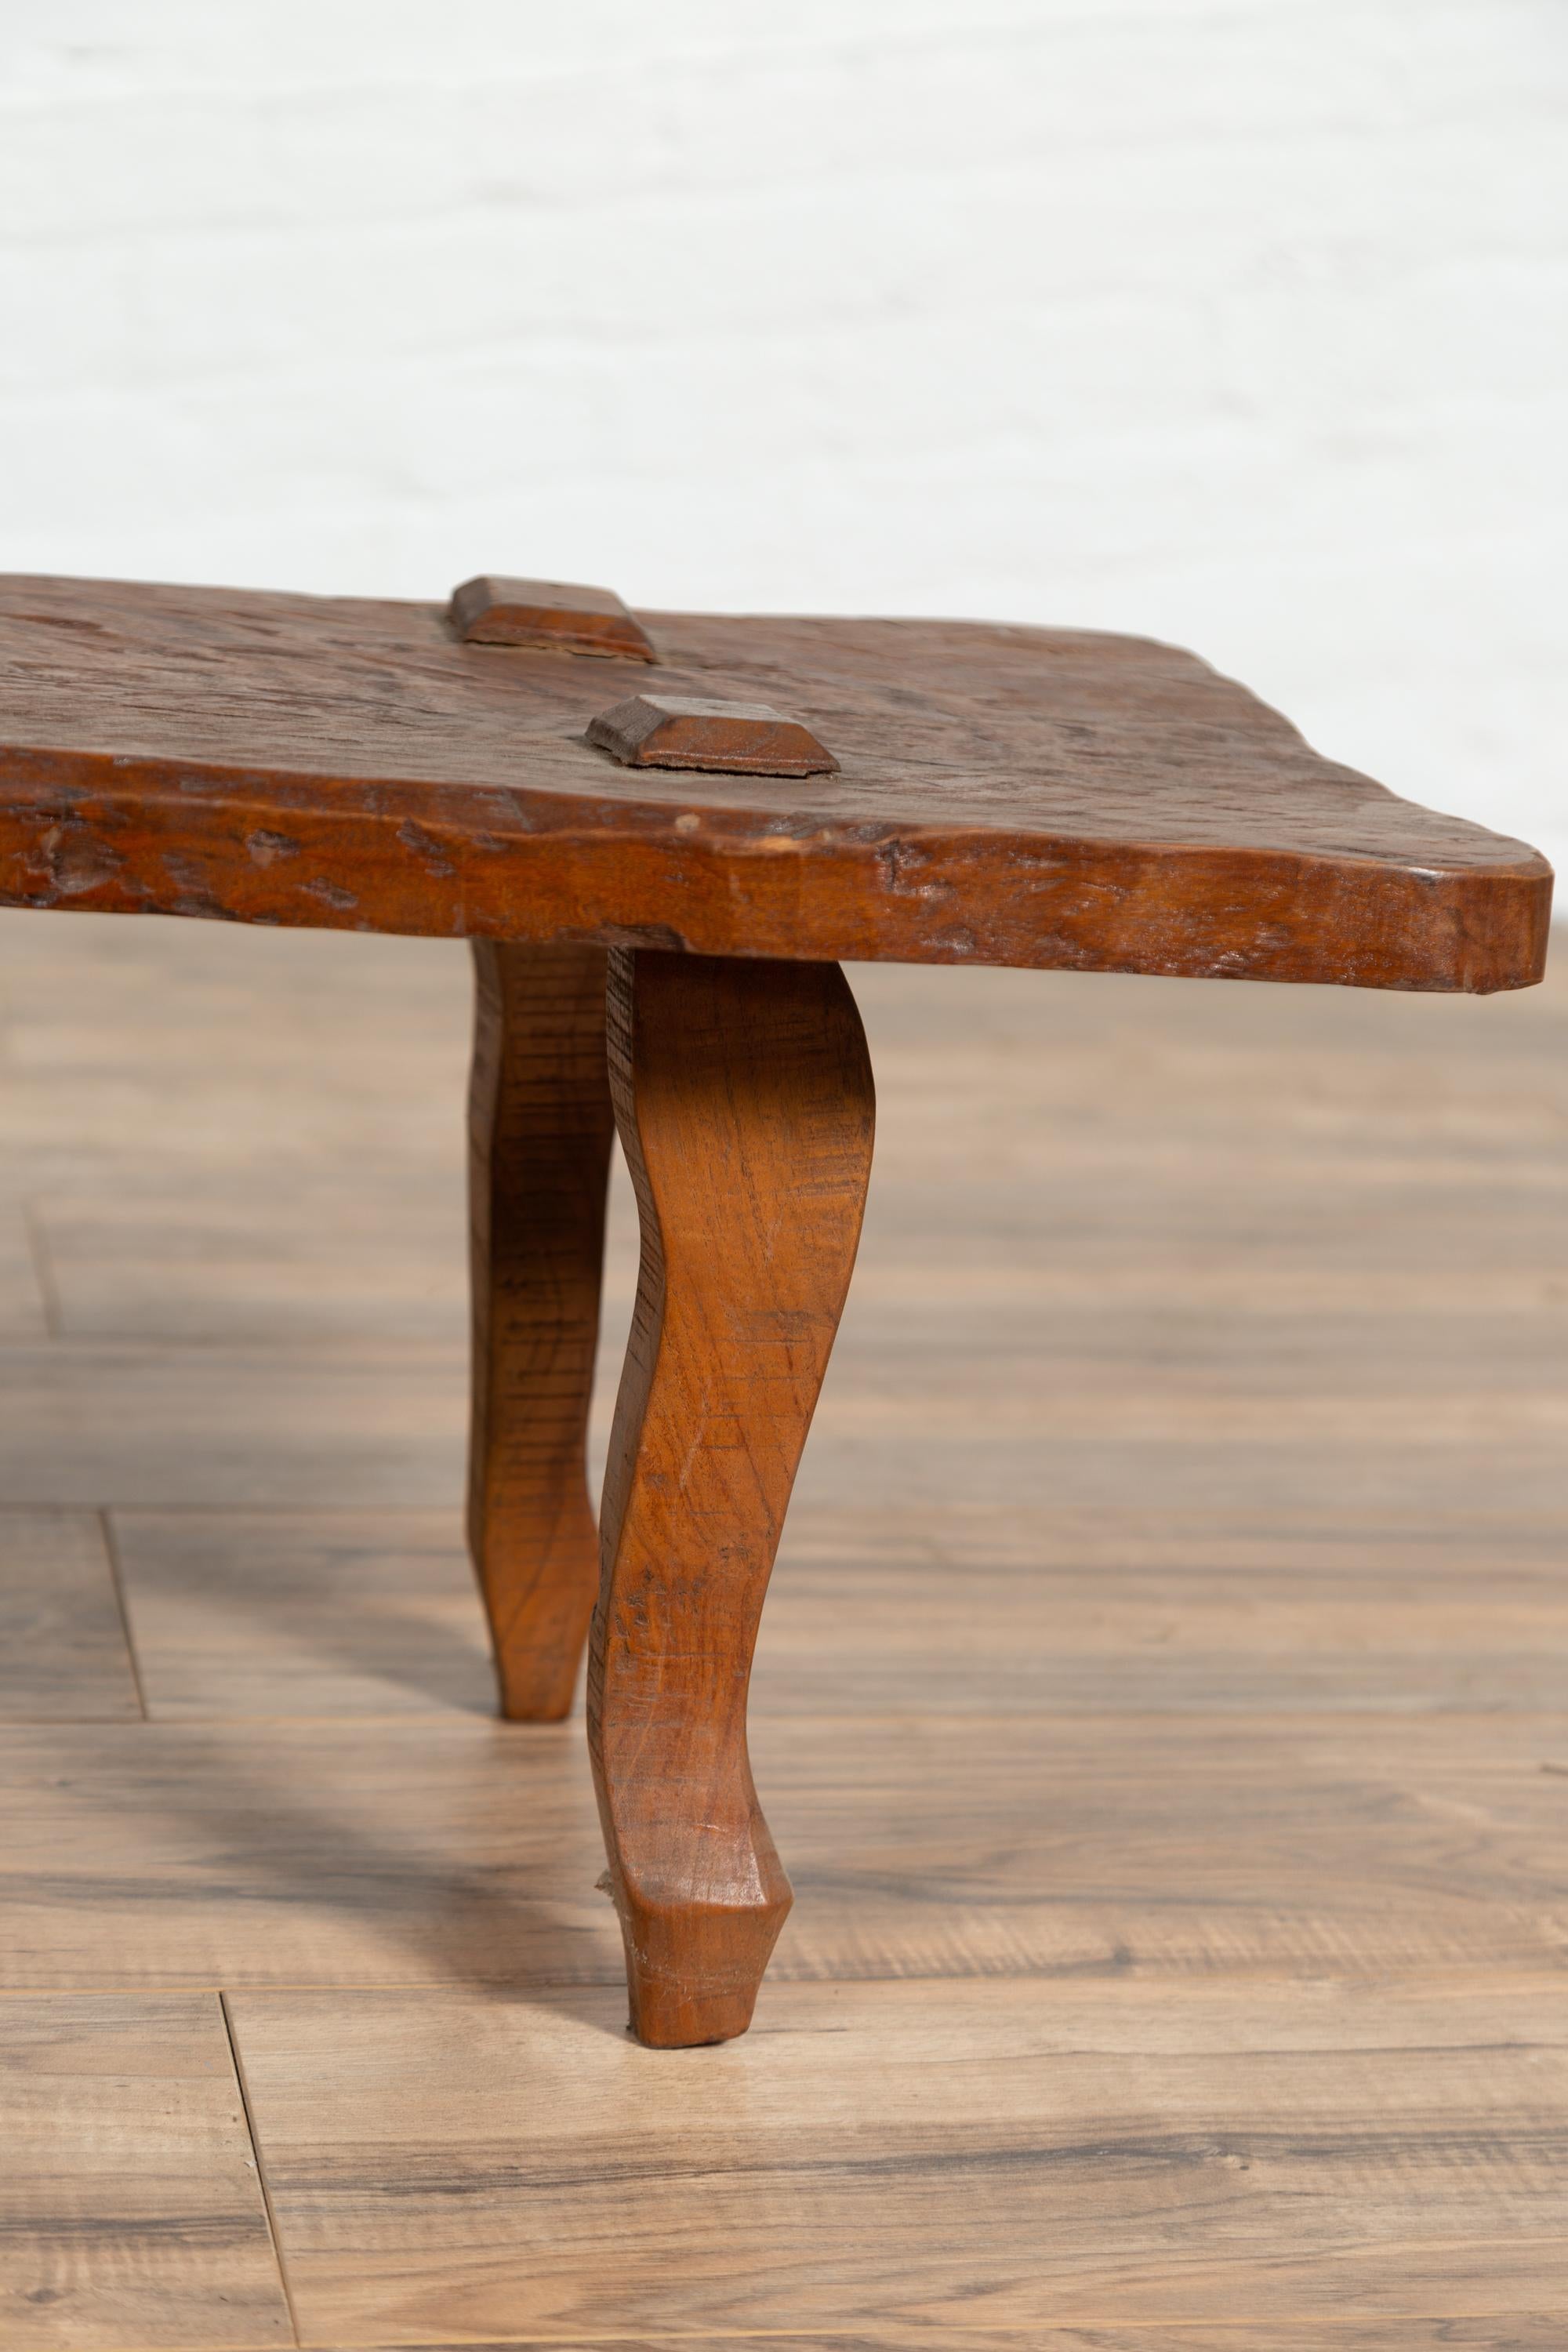 20th Century Rustic Javanese Freeform Low Bench Made of Antique Reclaimed Teak Textured Wood